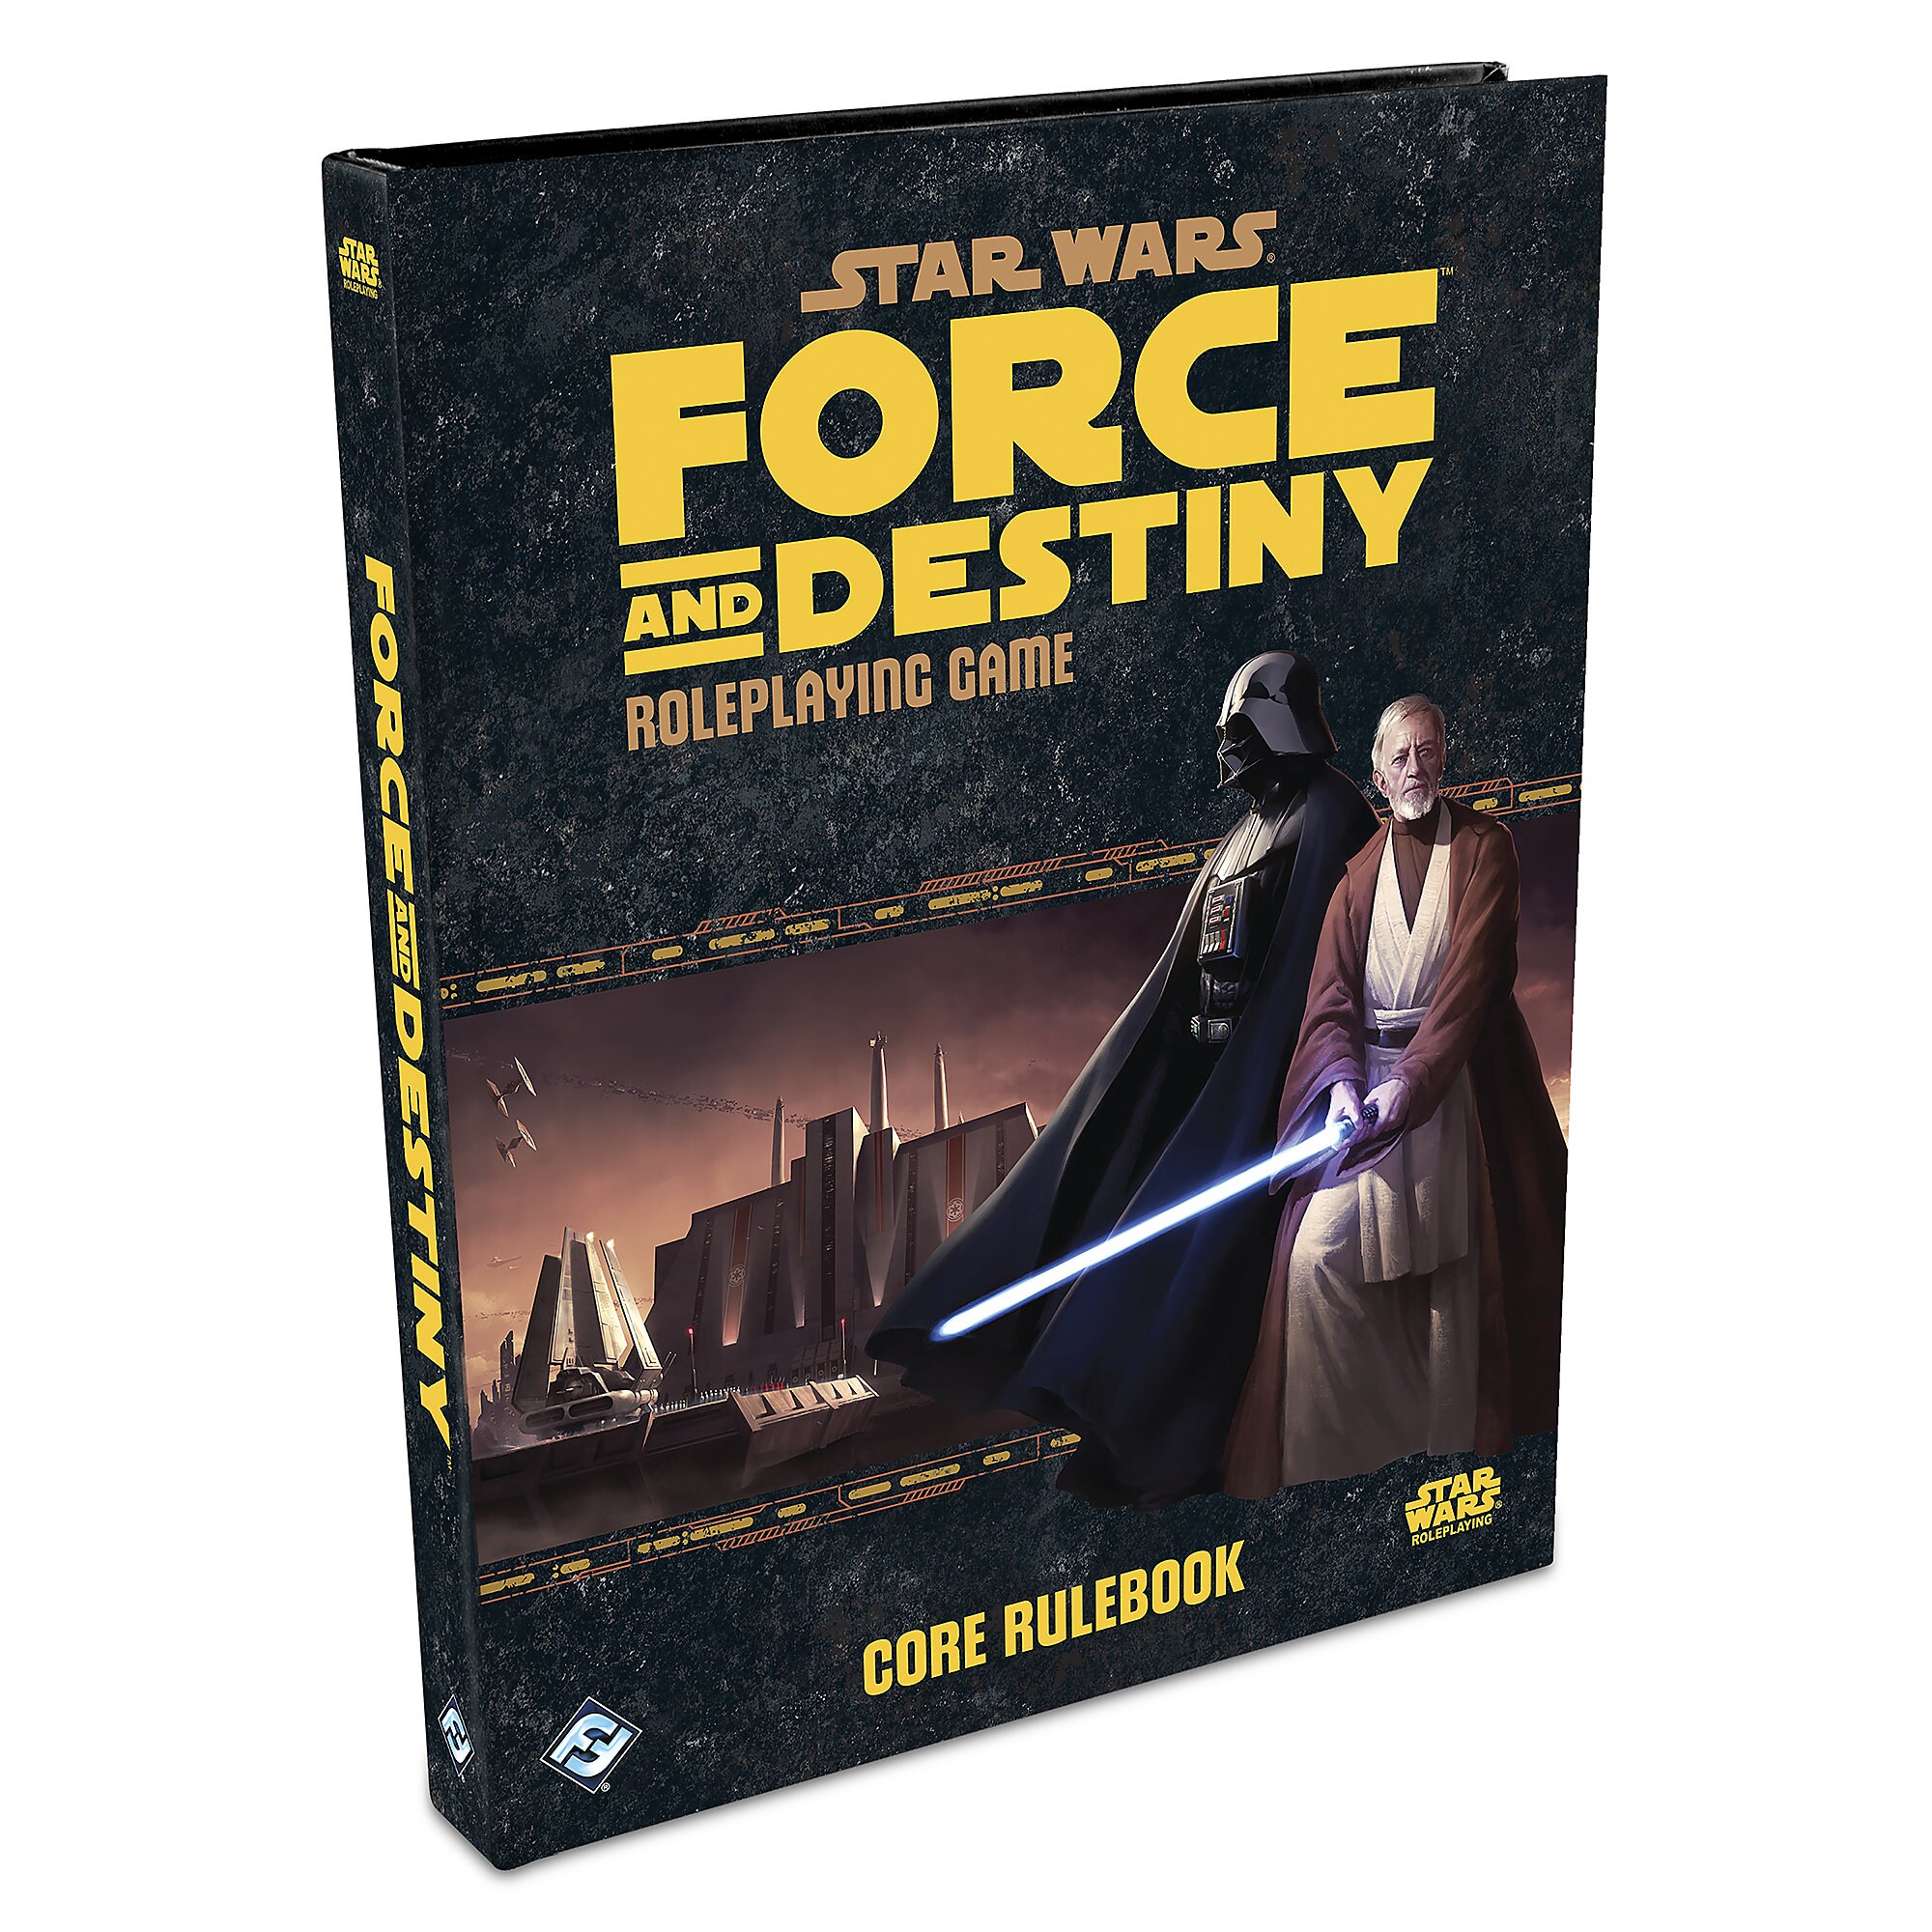 Star Wars: Force and Destiny Roleplaying Game - Core Rulebook